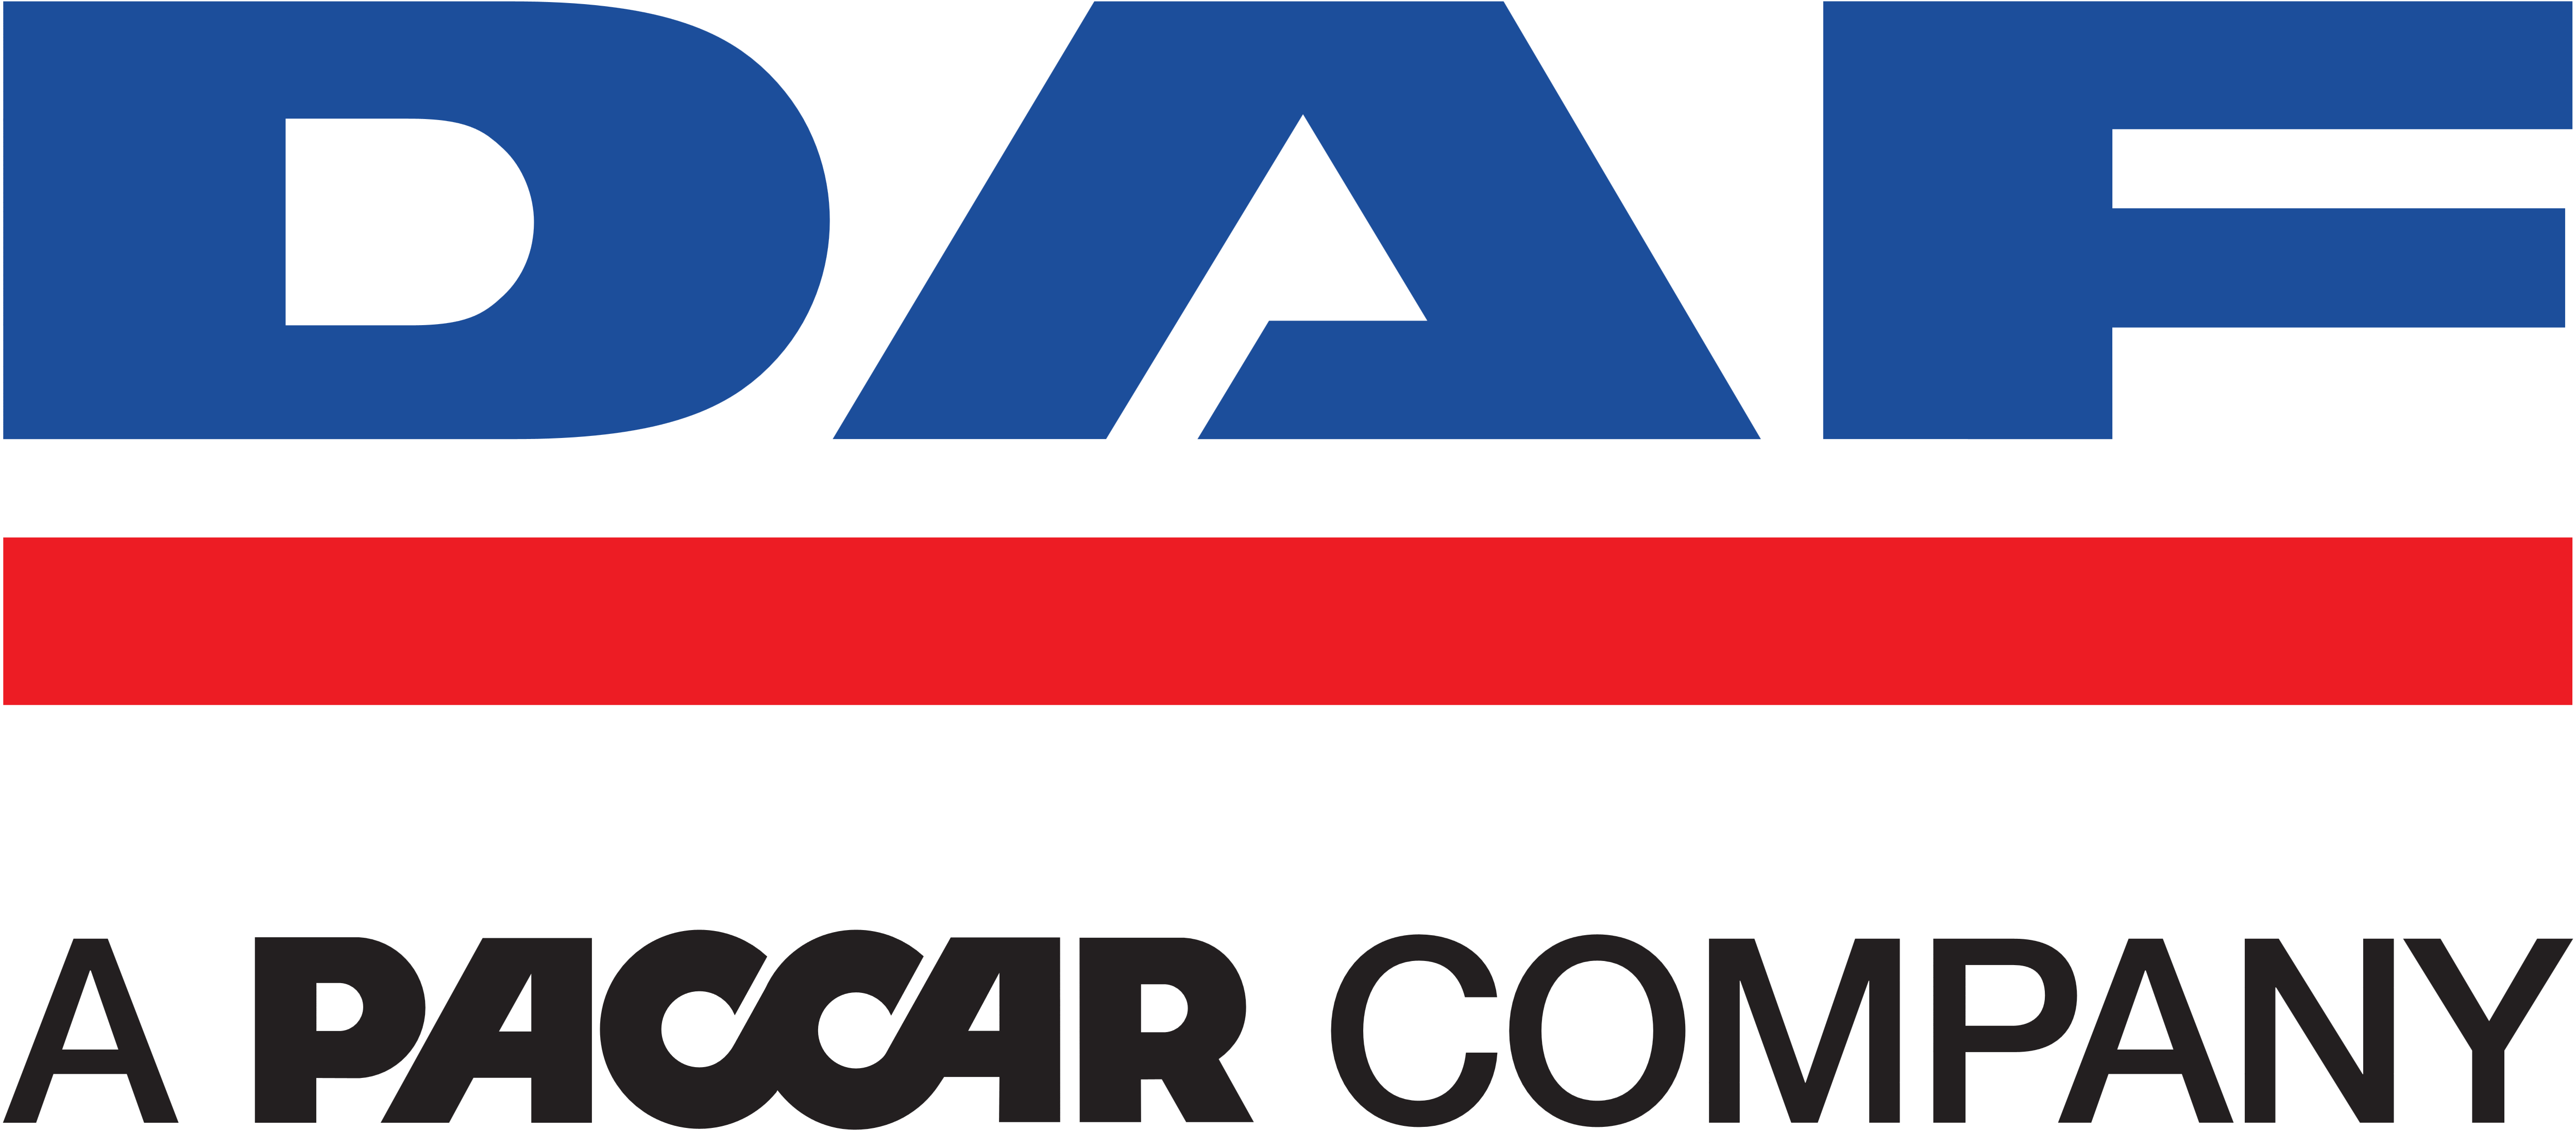 DAF_Paccar_company.png